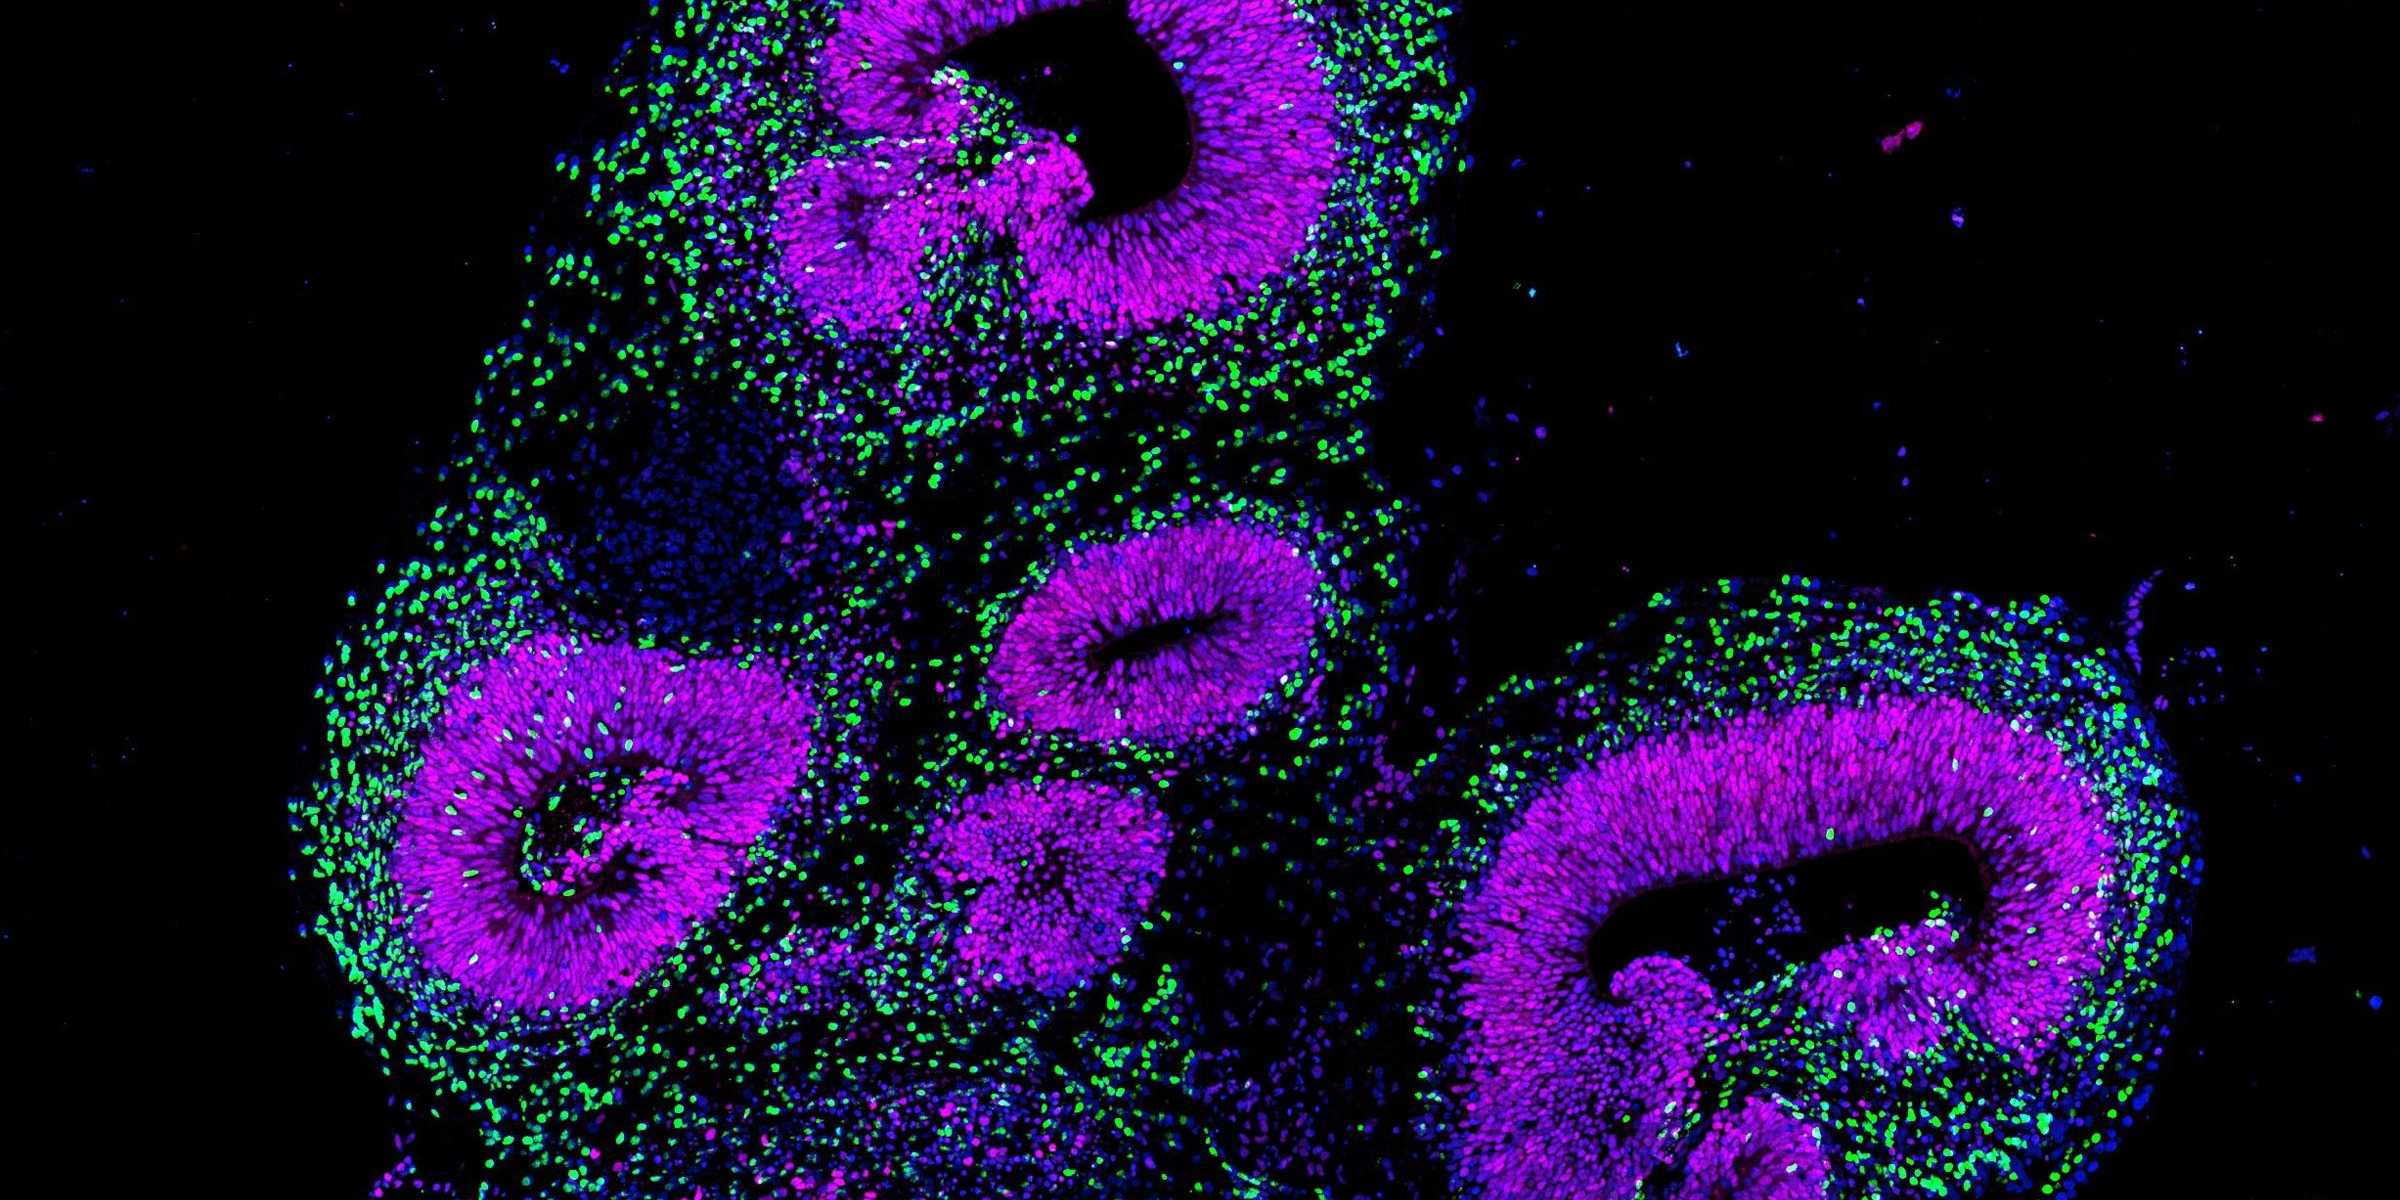 Brain organoid from human stem cells under the fluorescence microscope: the protein GLI3 is stained purple and marks neuronal precursor cells in forebrain regions of the organoid. Neurons are stained green.